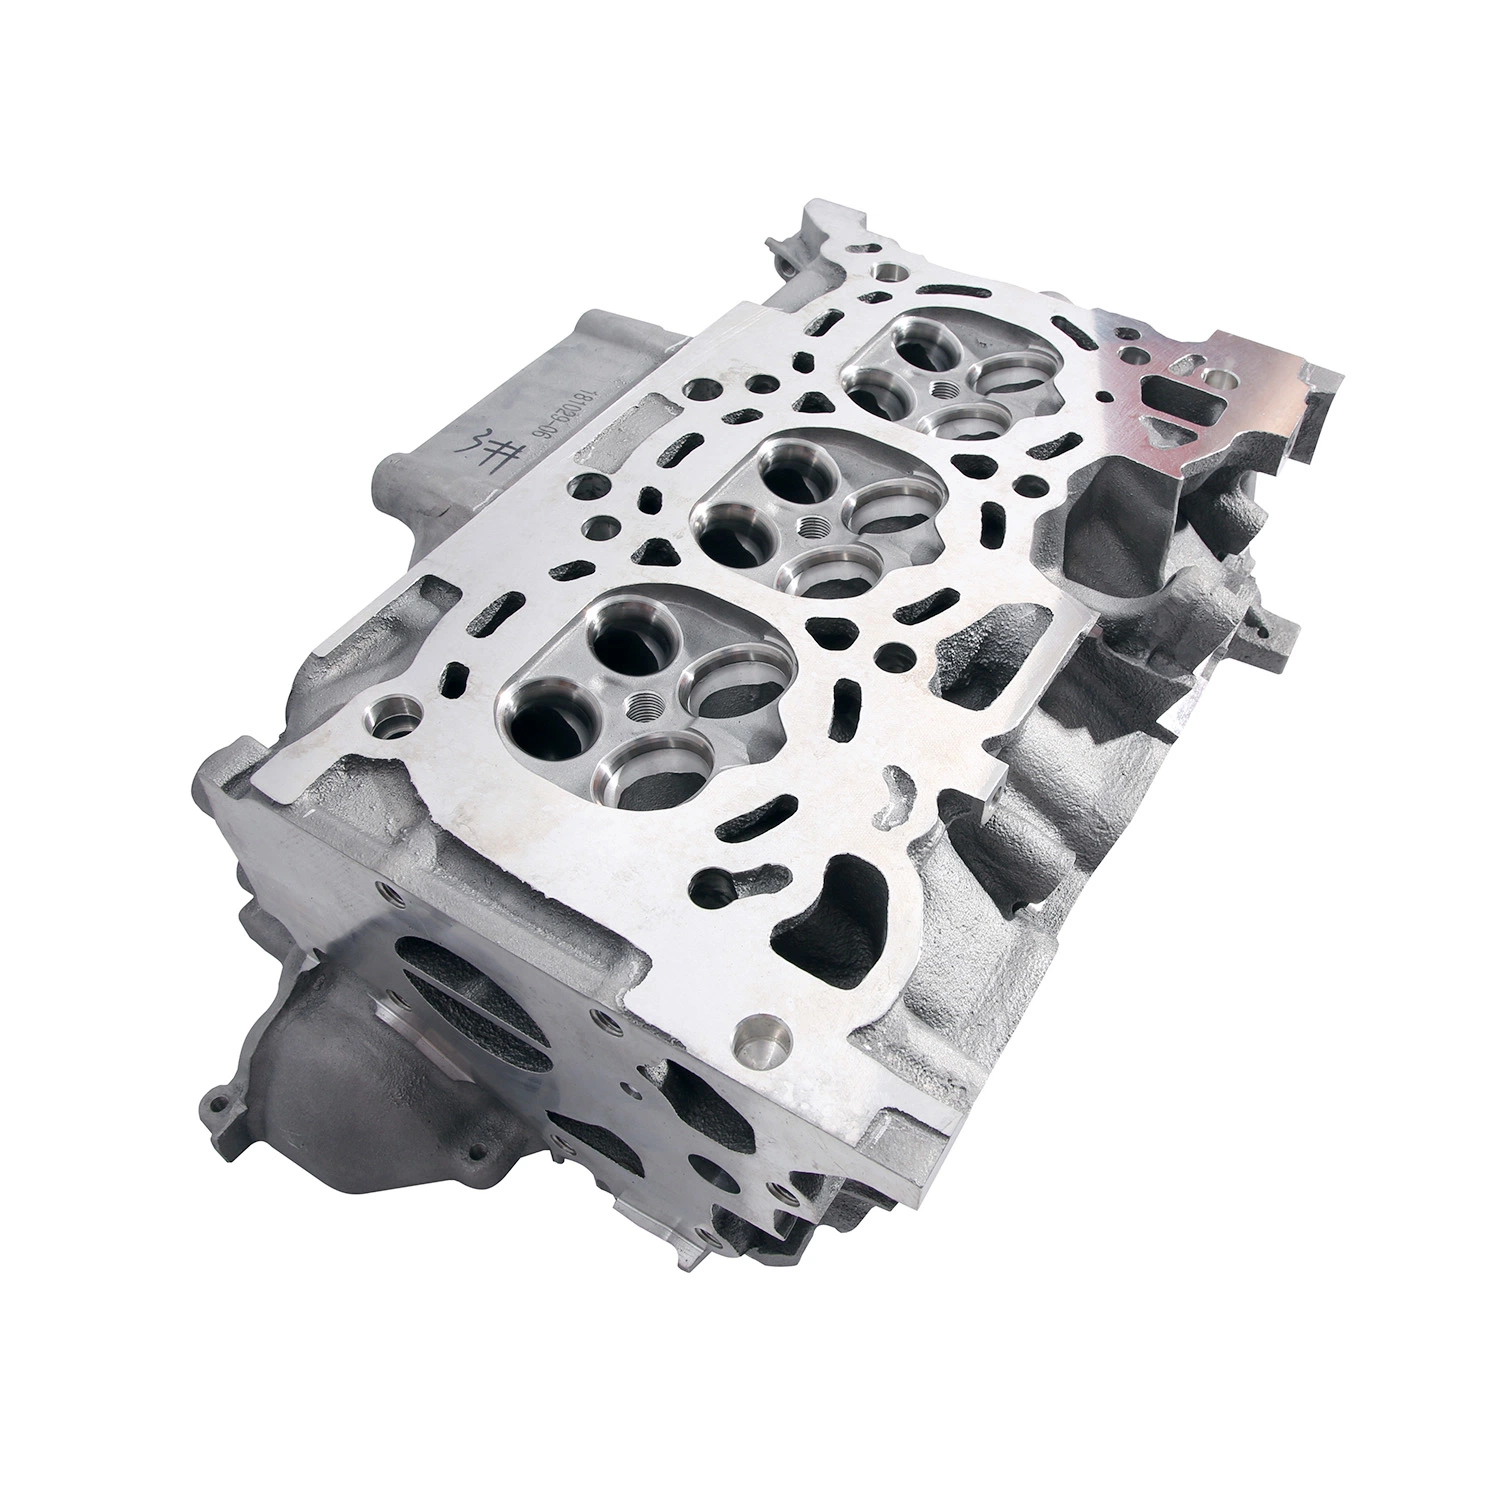 OEM Customized Sand 3D Printer & Motorcycle Spare Part Auto Engine Block Cylinder Head Cover Case by Rapid Prototyping with 3D Printing Sand Casting & Machining